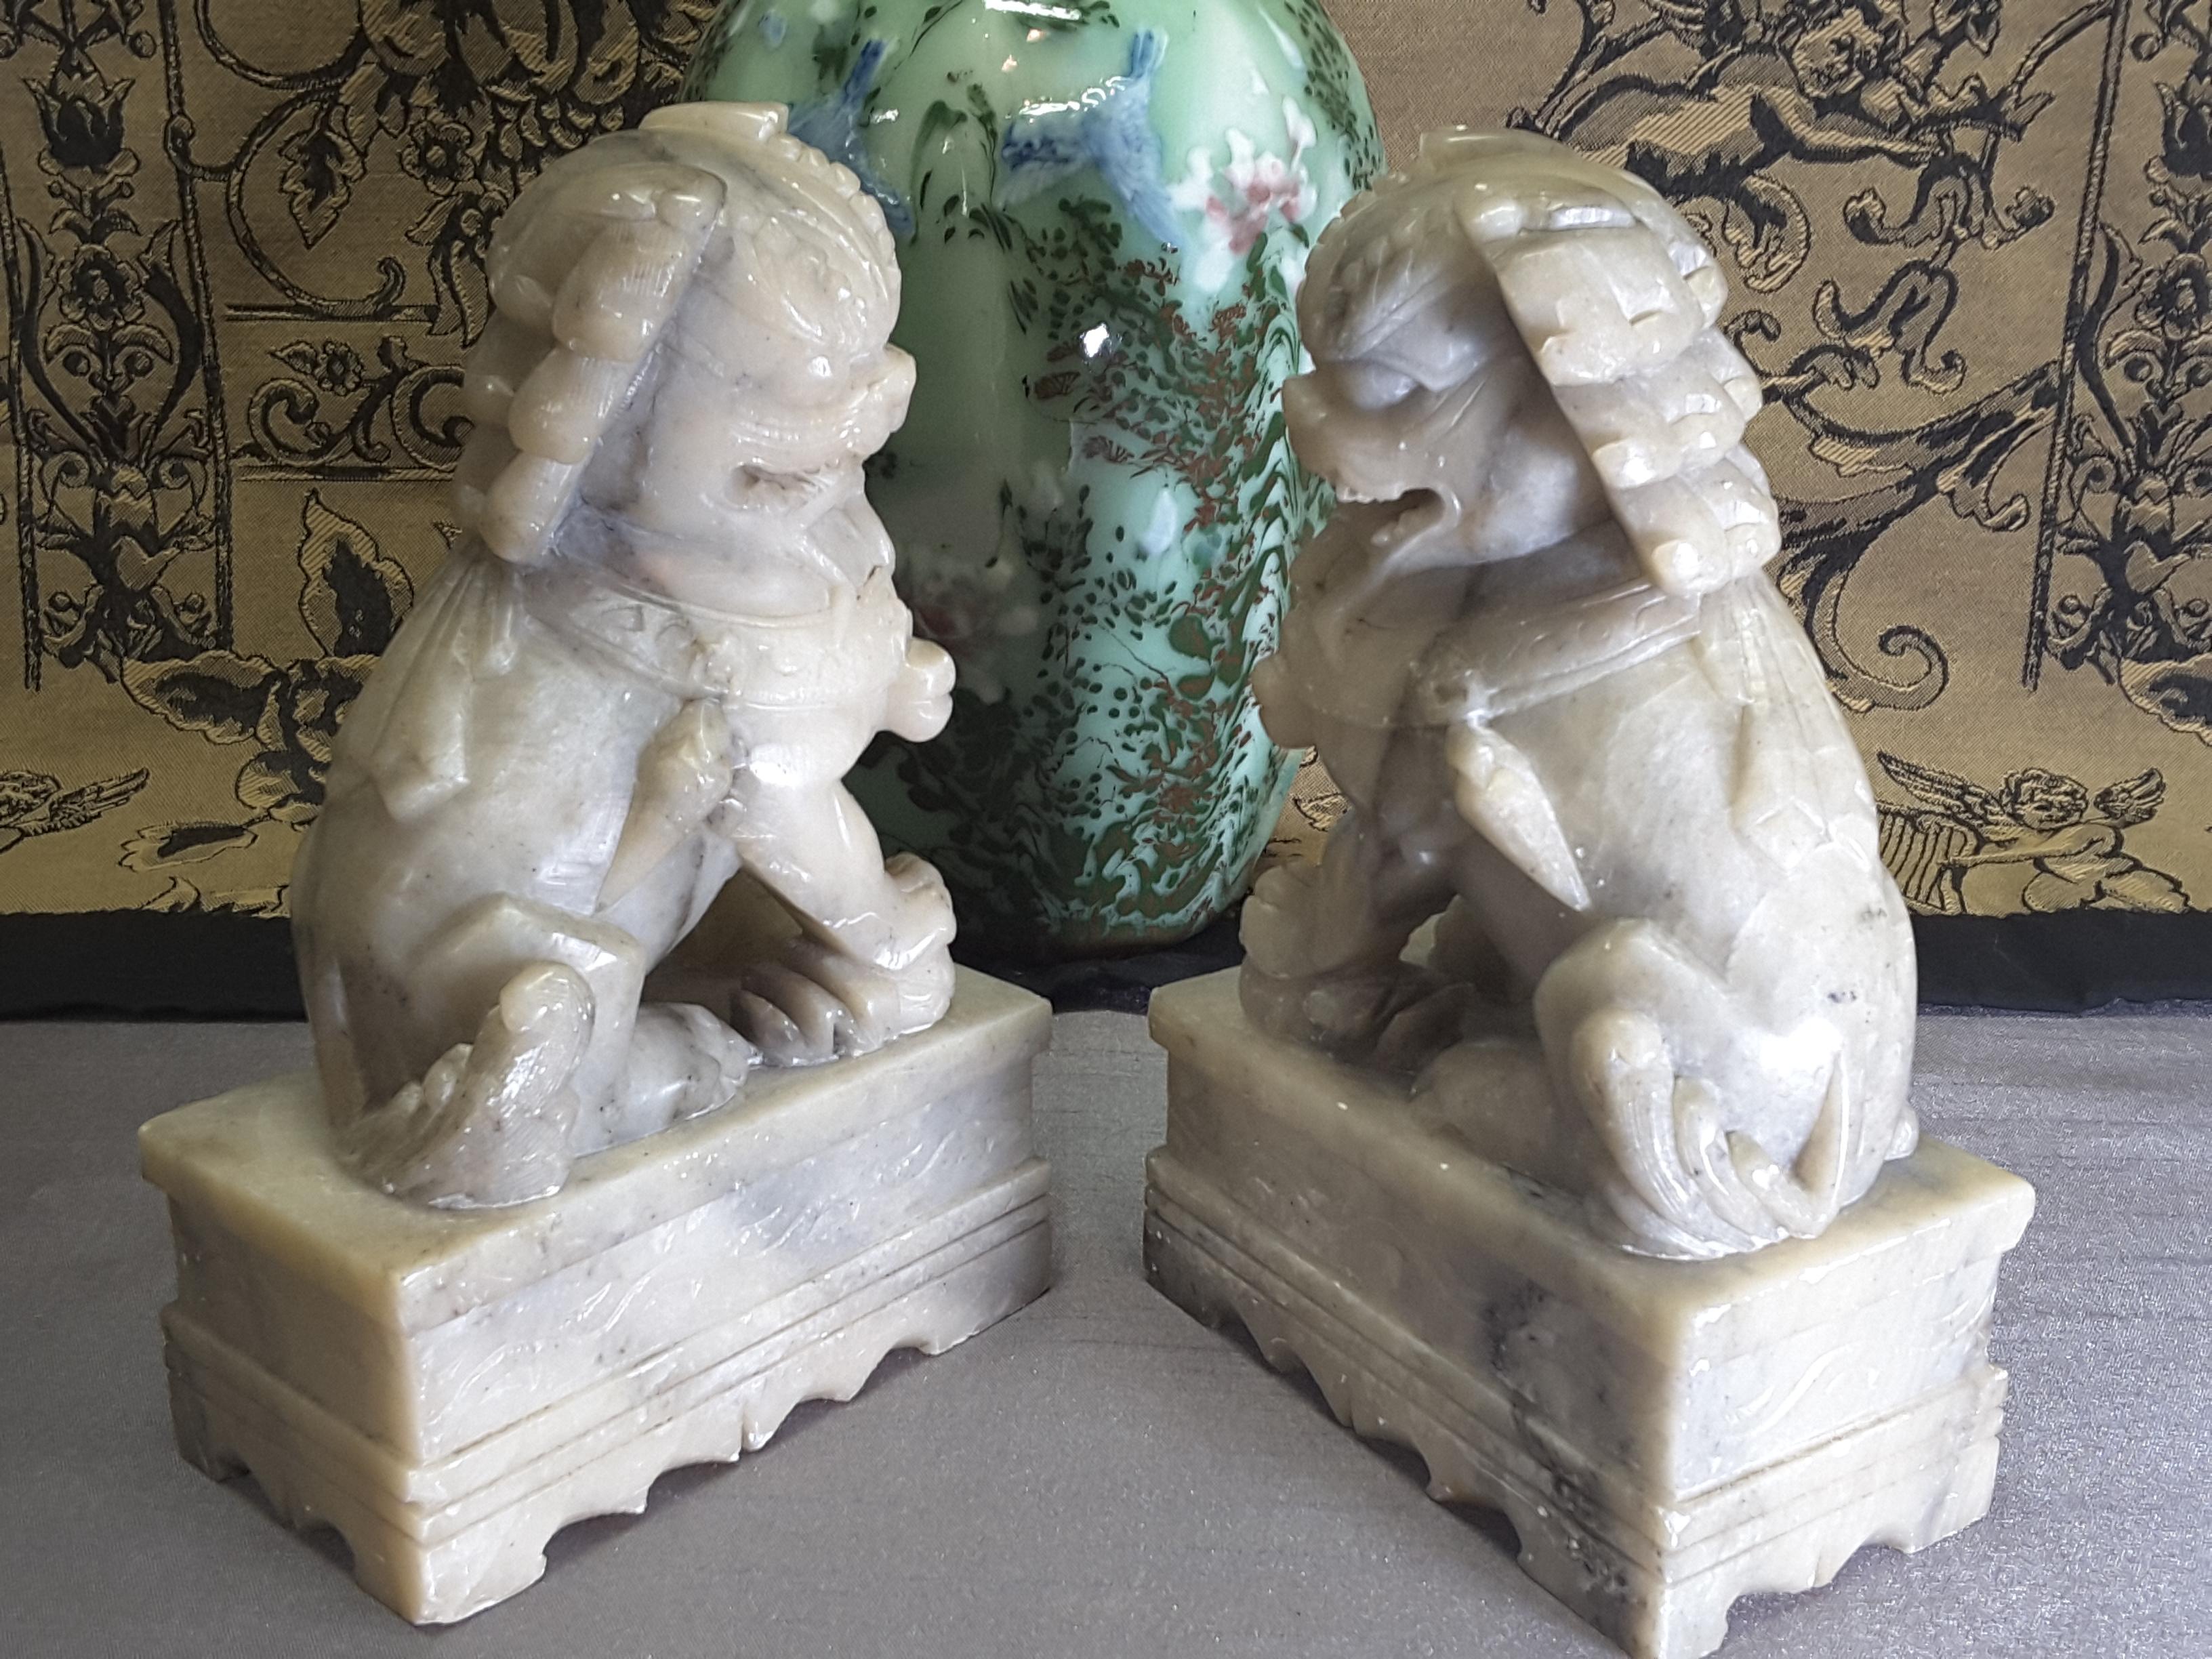 A nice pair of Chinese Foo Dogs/Temple Dogs, carved Soapstone, early 20th century, circa 1920-1930s. The foo dogs are on plinth base with scallop and scroll decoration. The Foo Dogs are opposite facing with one raised paw, minor marks to soapstone